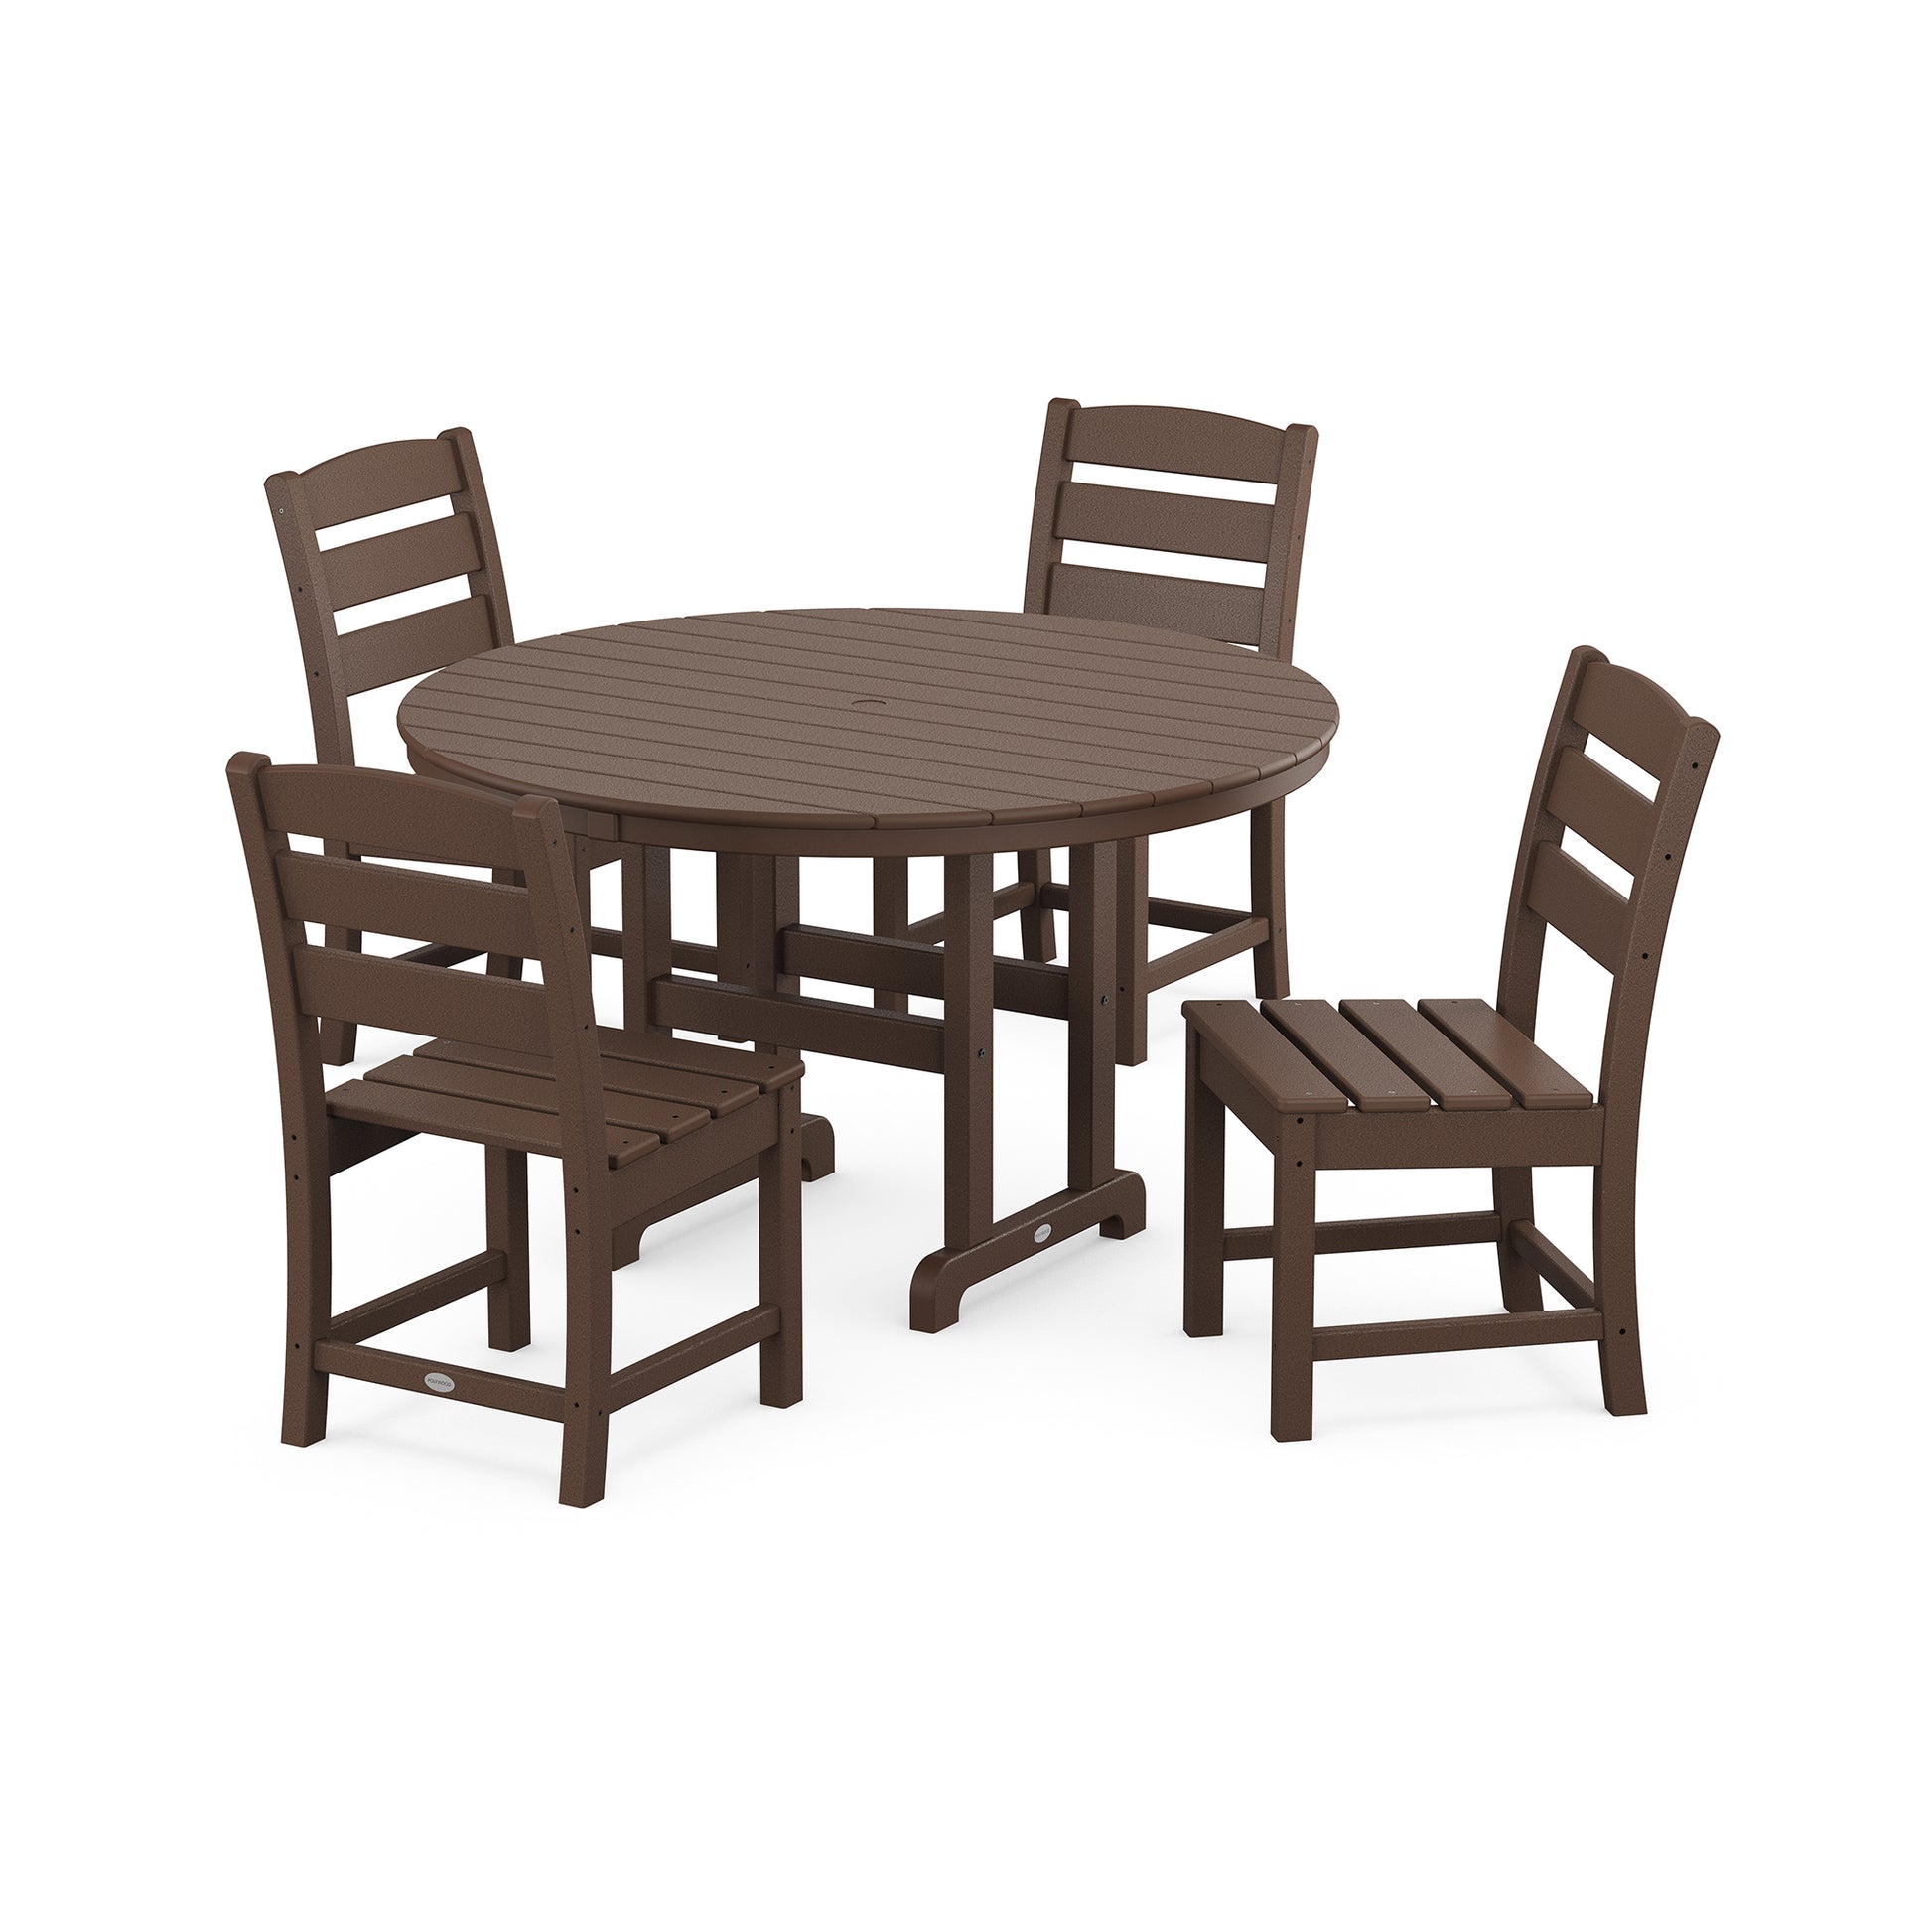 A five-piece outdoor dining set featuring a round table and four matching chairs, all in weather-resistant POLYWOOD® with a slatted design. -> A five-piece outdoor dining set featuring a round table and four matching chairs, all in weather-resistant POLYWOOD Lakeside 5-Piece Round Side Chair Dining Set.